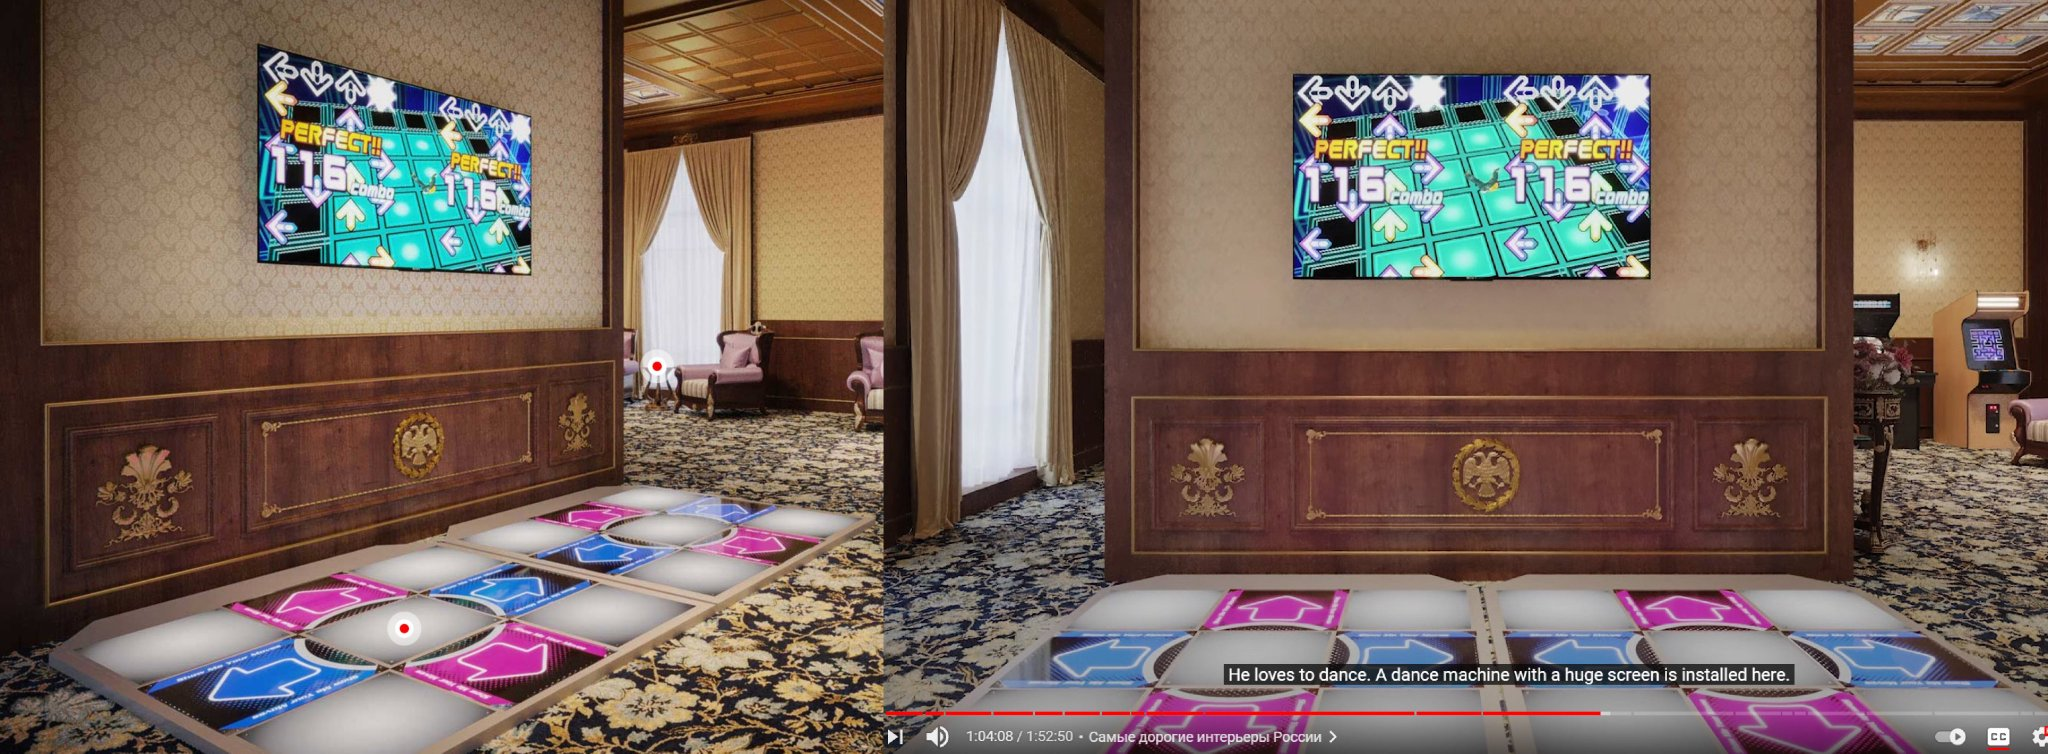 Renders of Putin's game room, showing identical screens on the DDR machine.